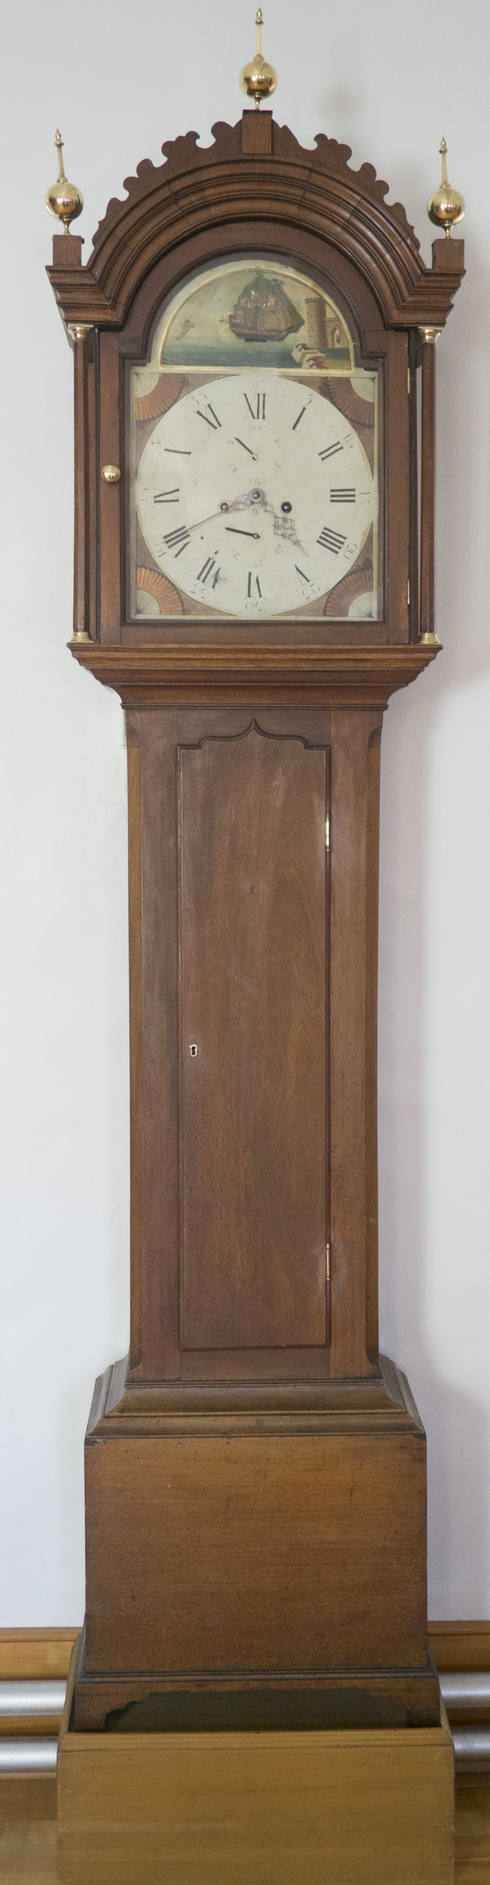 Brown wood Grandfather clock. Roman numeral. Up the dial, a ship. Arched top finish, carved and ornated with three gilded spindle.